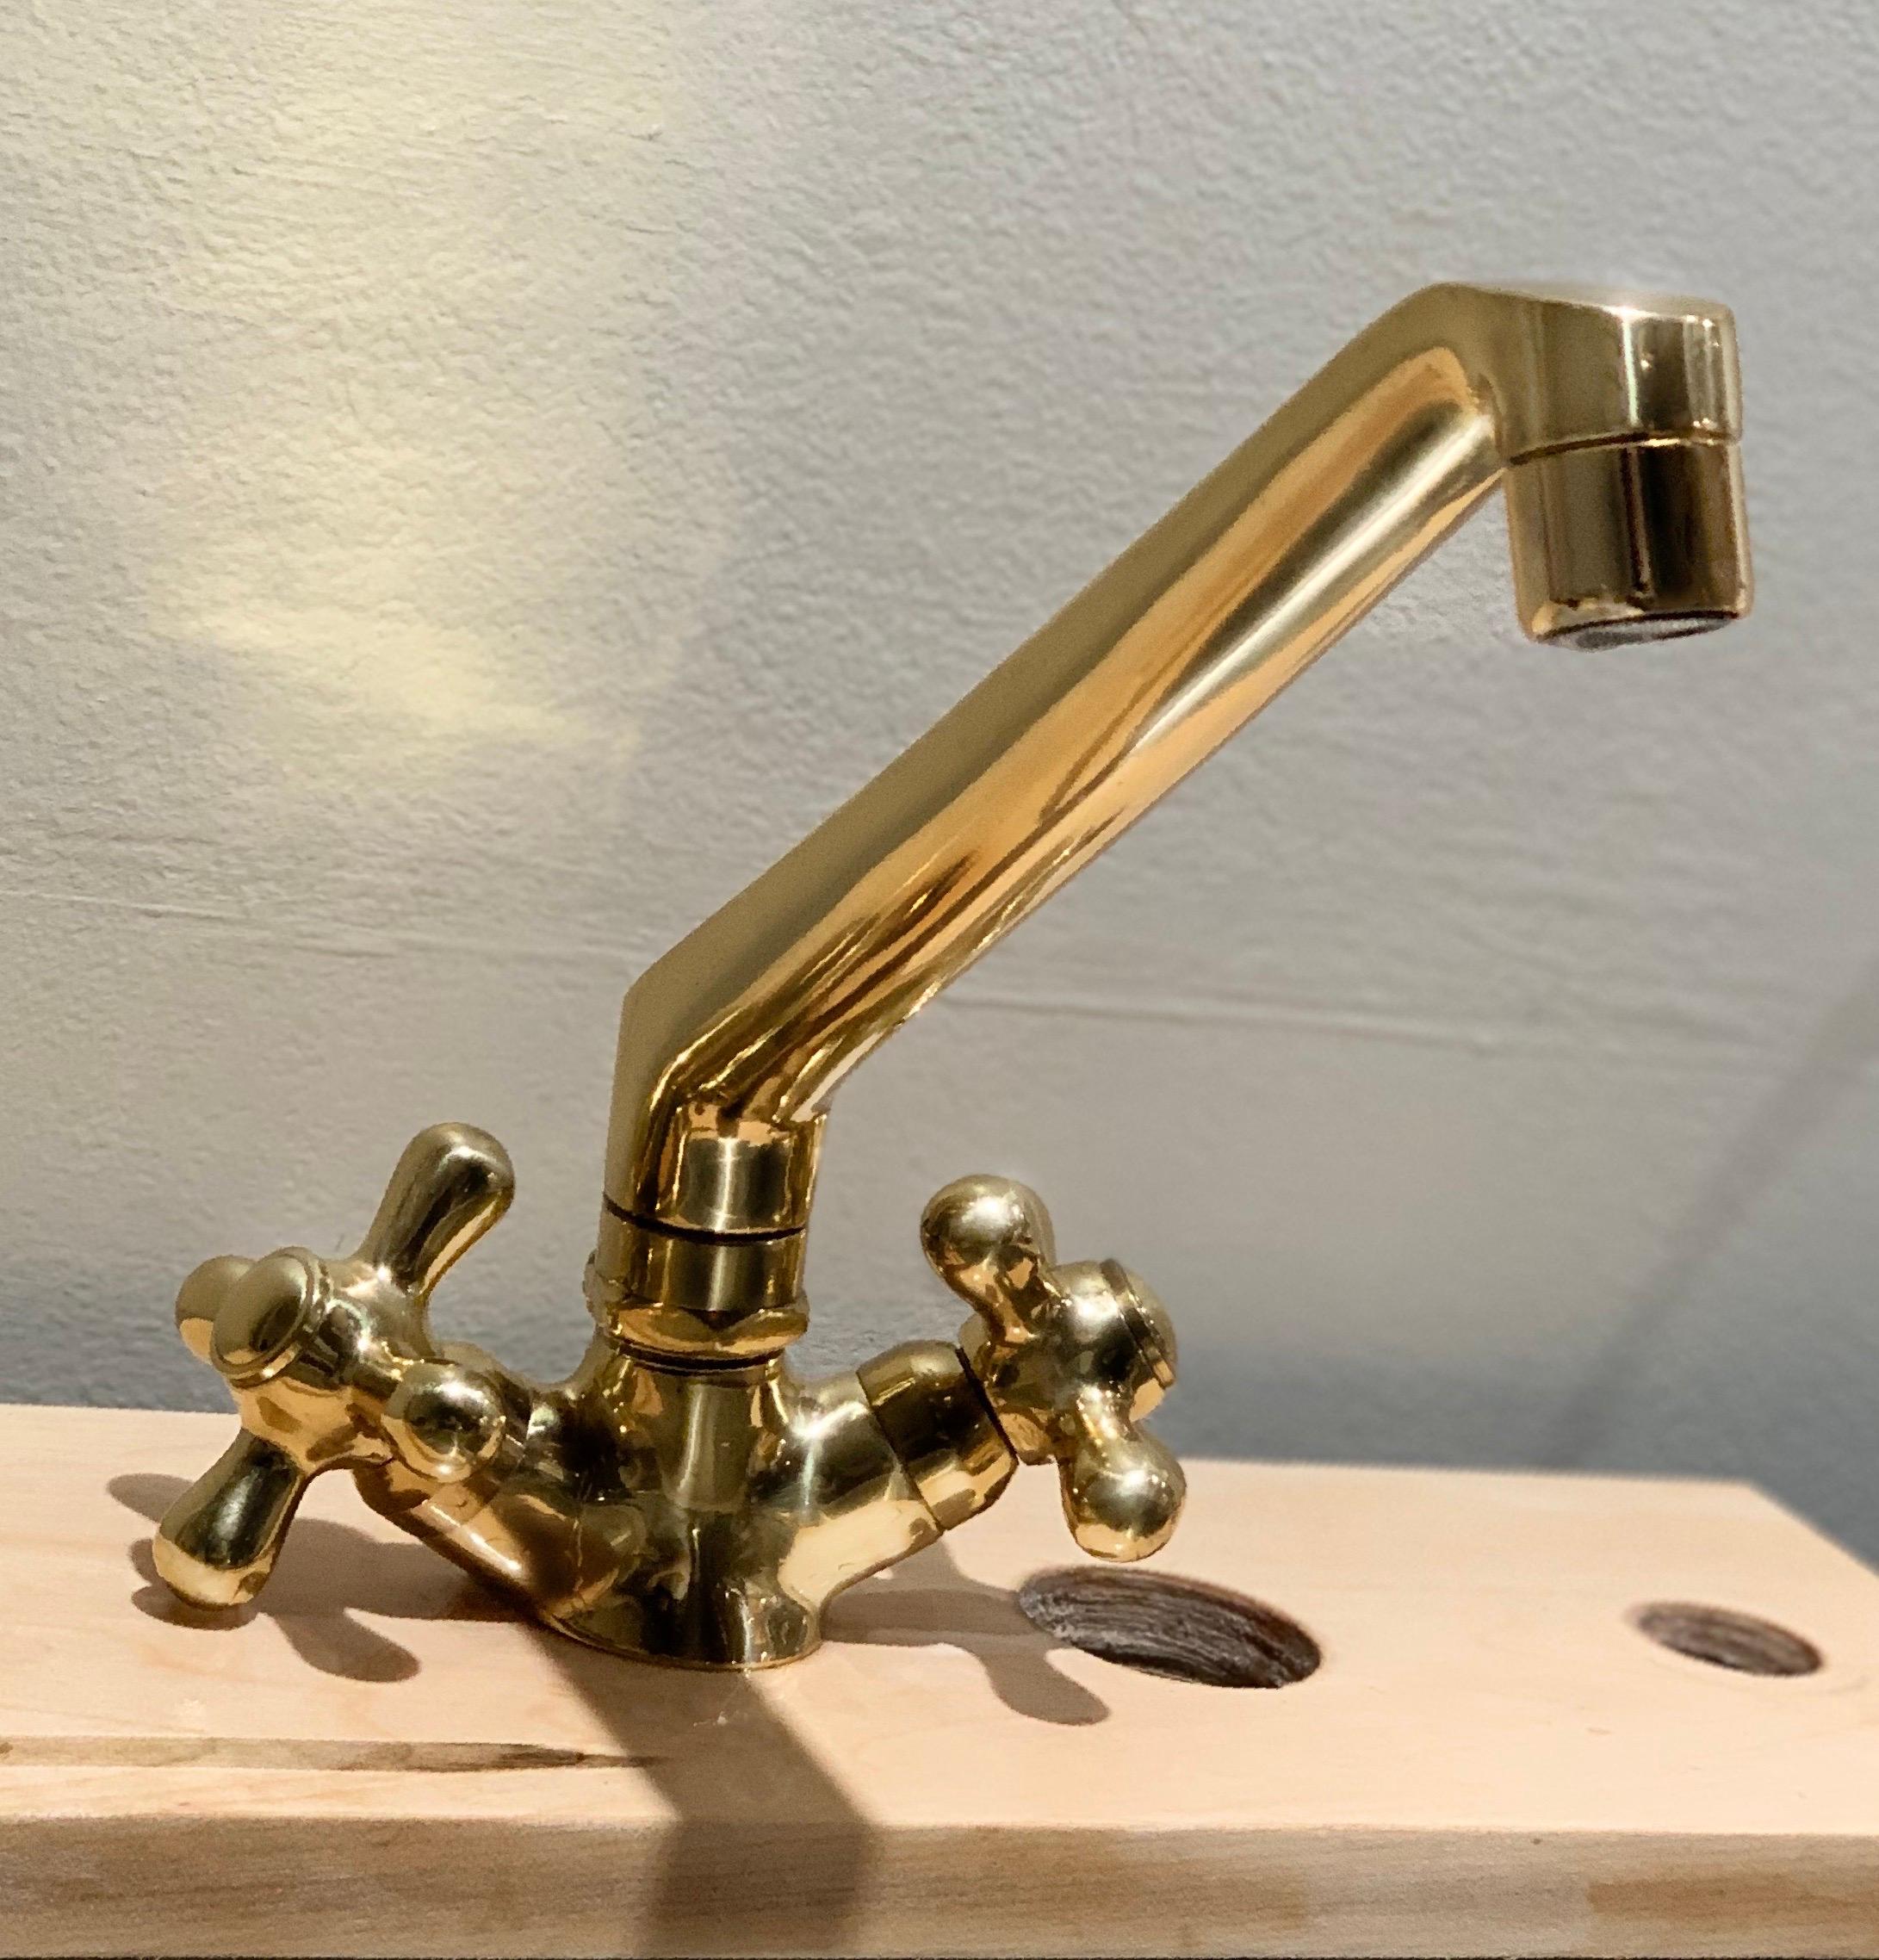 Vintage Italian Modern Fantini brass faucet, deck-mount, kitchen fixture, 1970s. “Mediterranean” model, very rare, display unit then stored in warehouse for decades. Many in Italy.